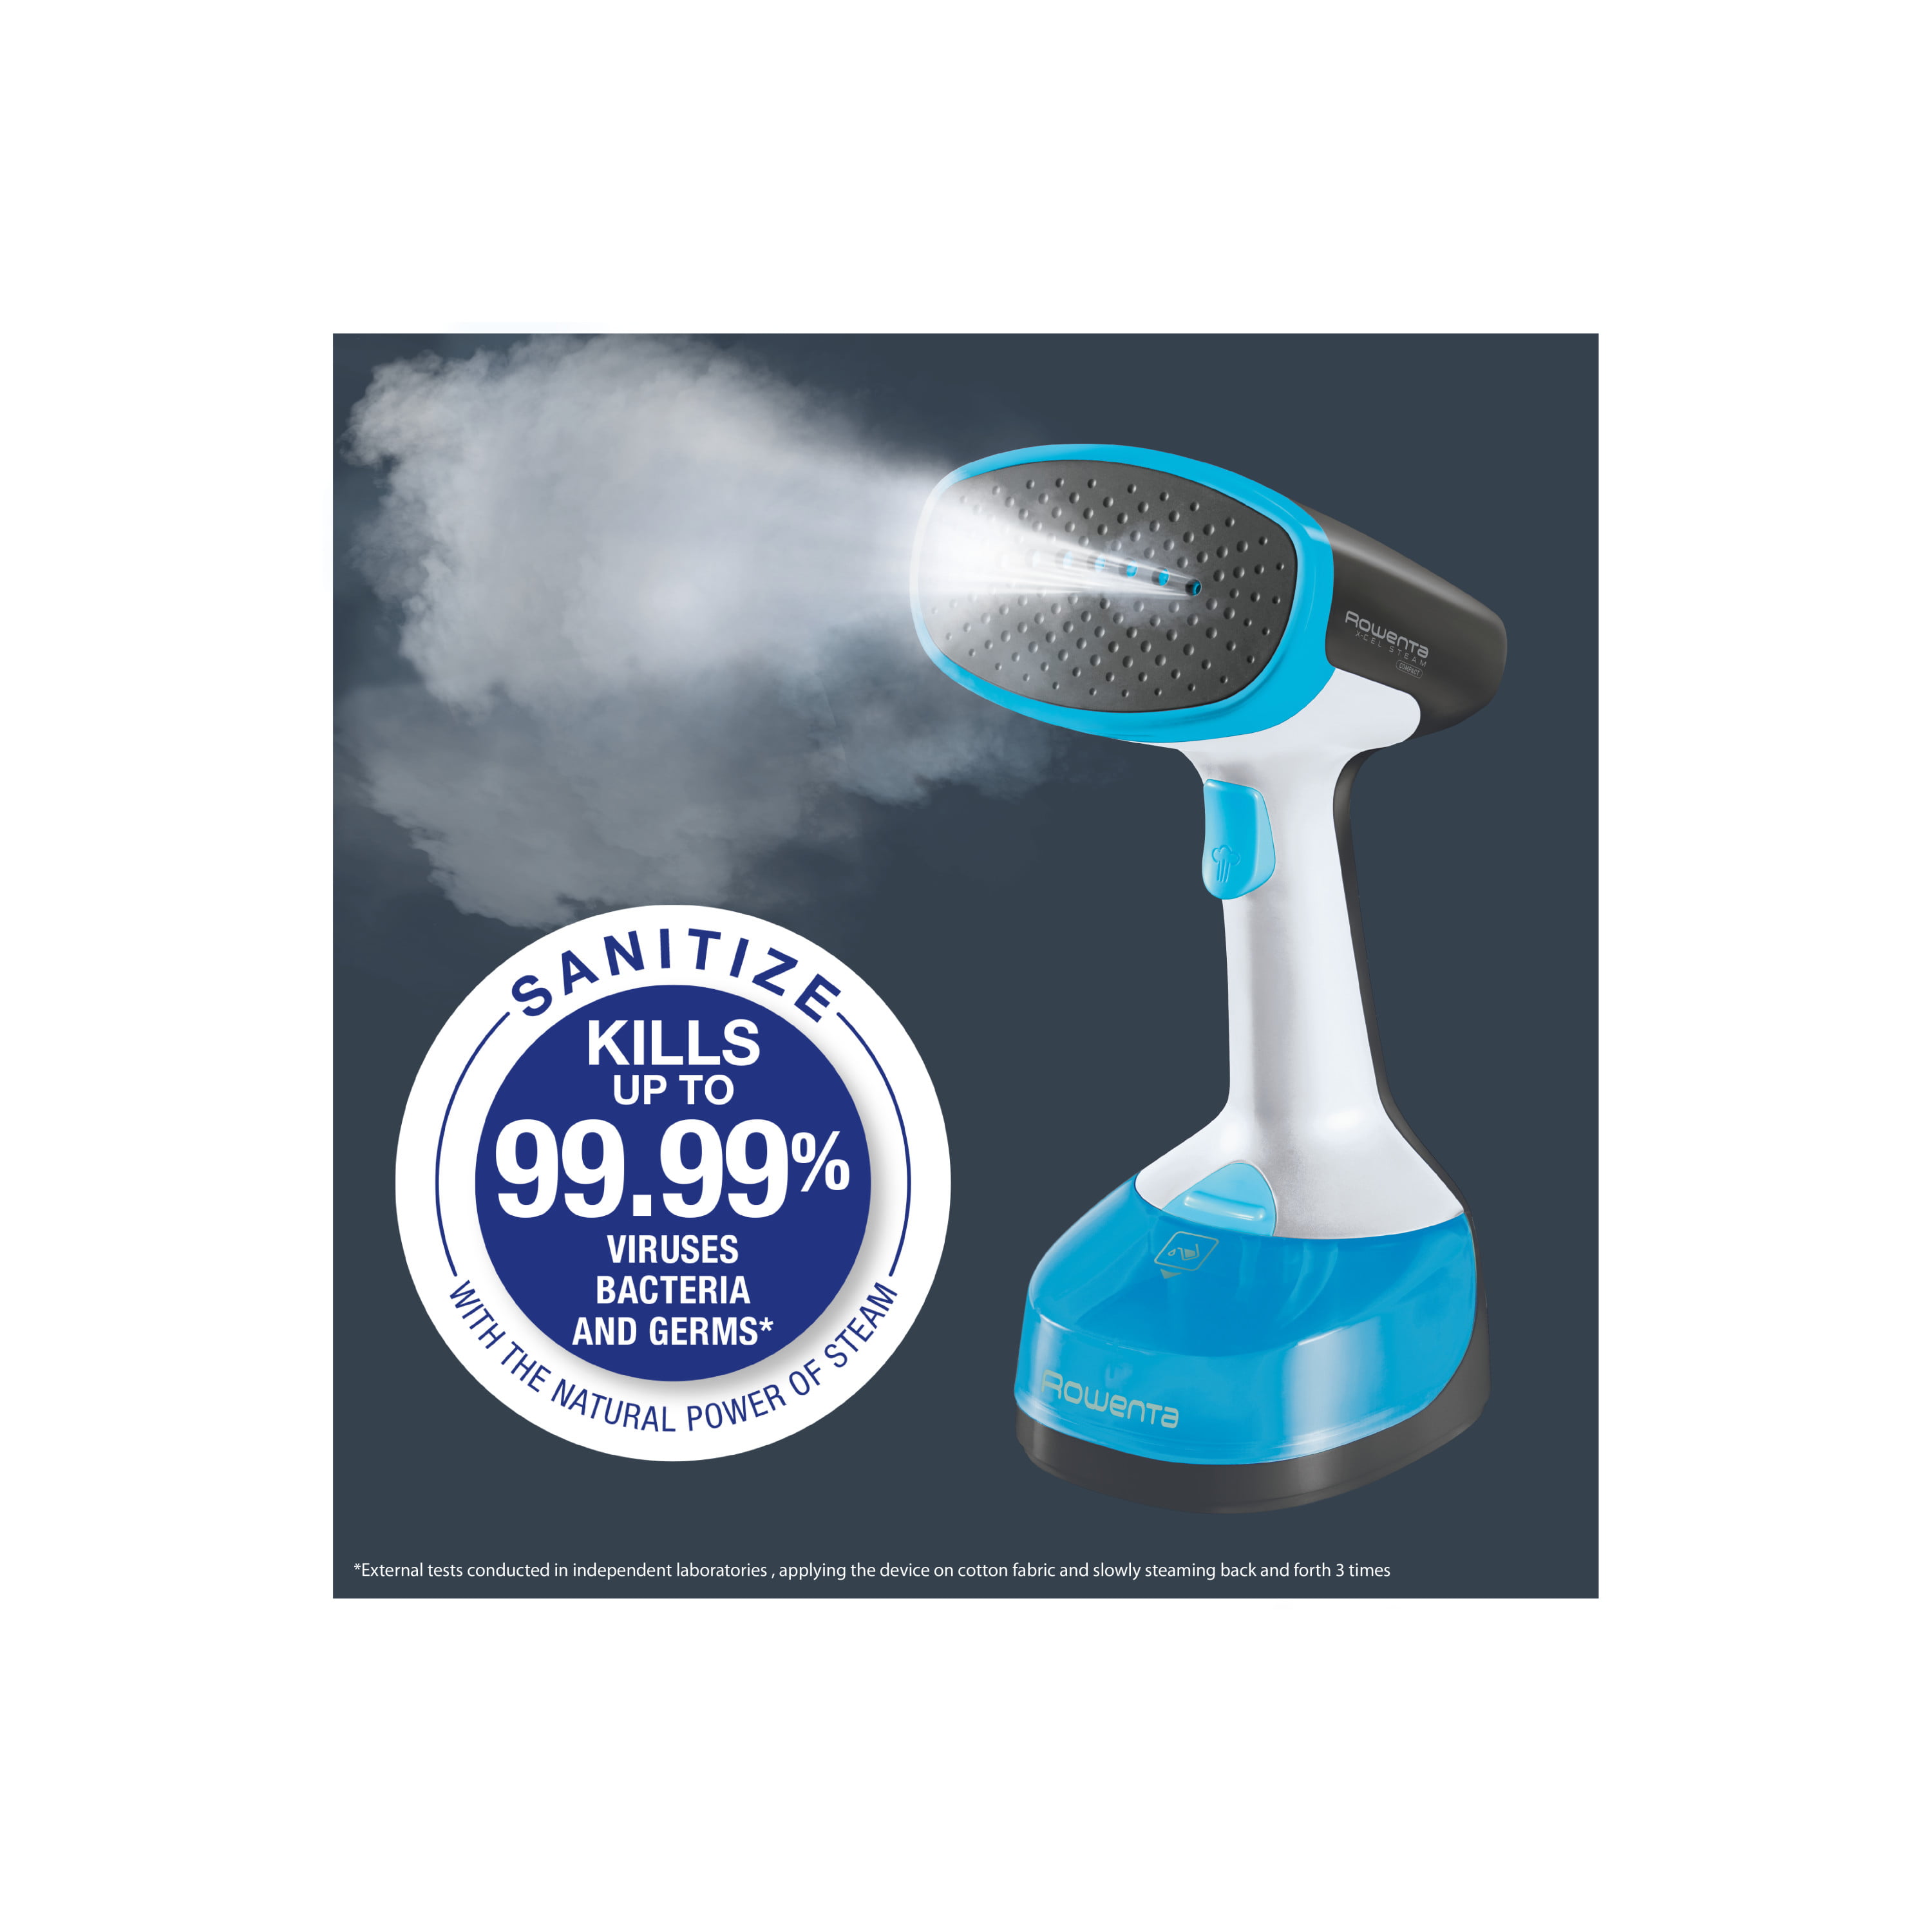 ROWENTA X-CEL STEAM MINUTE Hand Steamer, Model DR7071U1, “Kills 99.9% of  Germs and Bacteria” 